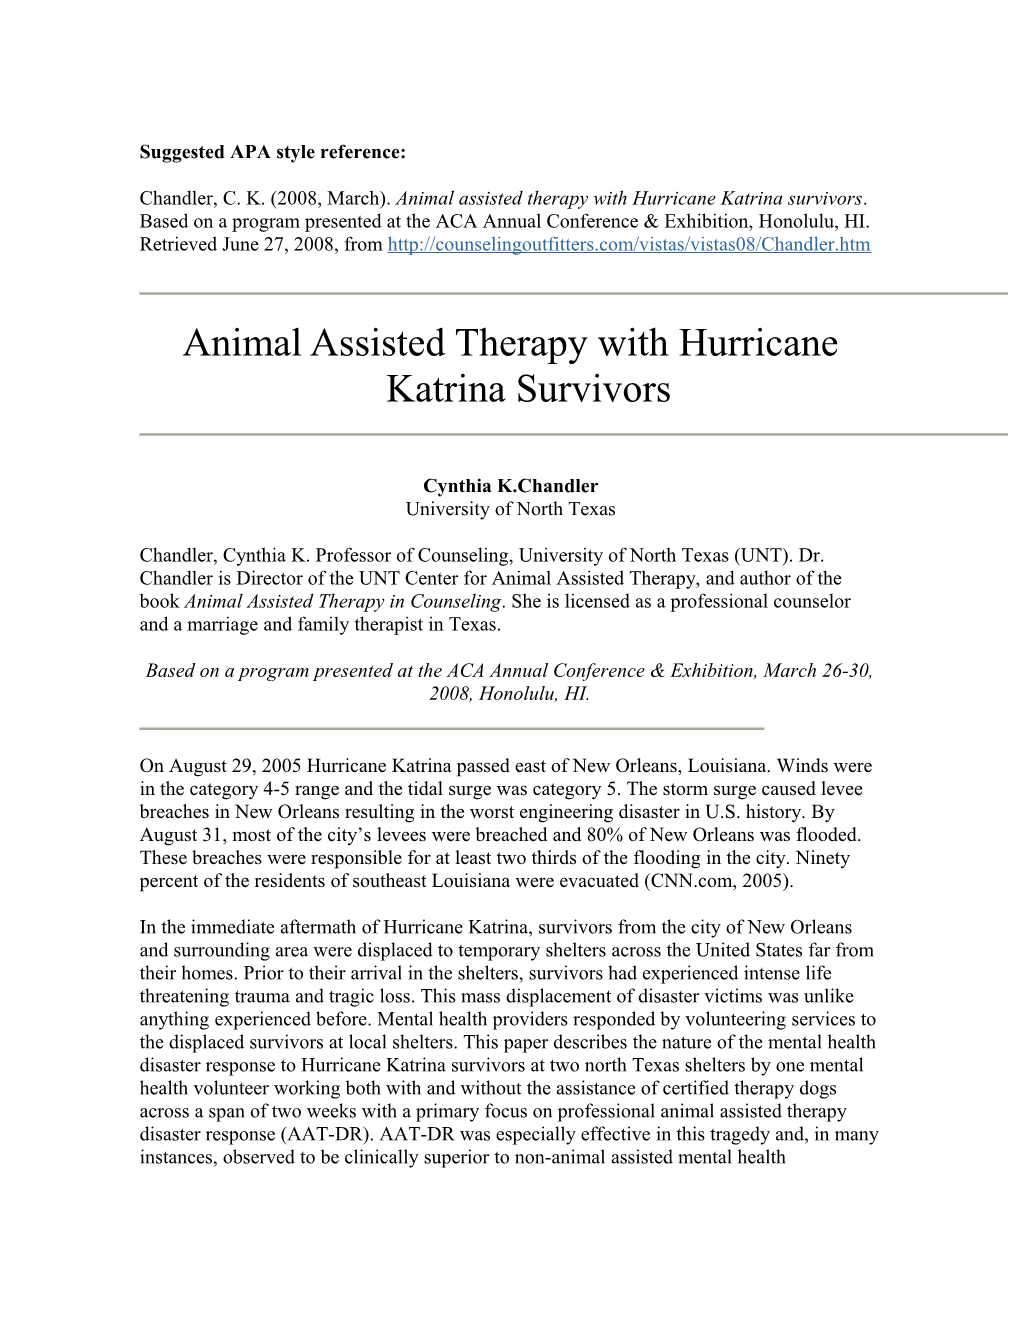 Animal Assisted Therapy with Hurricane Katrina Survivors